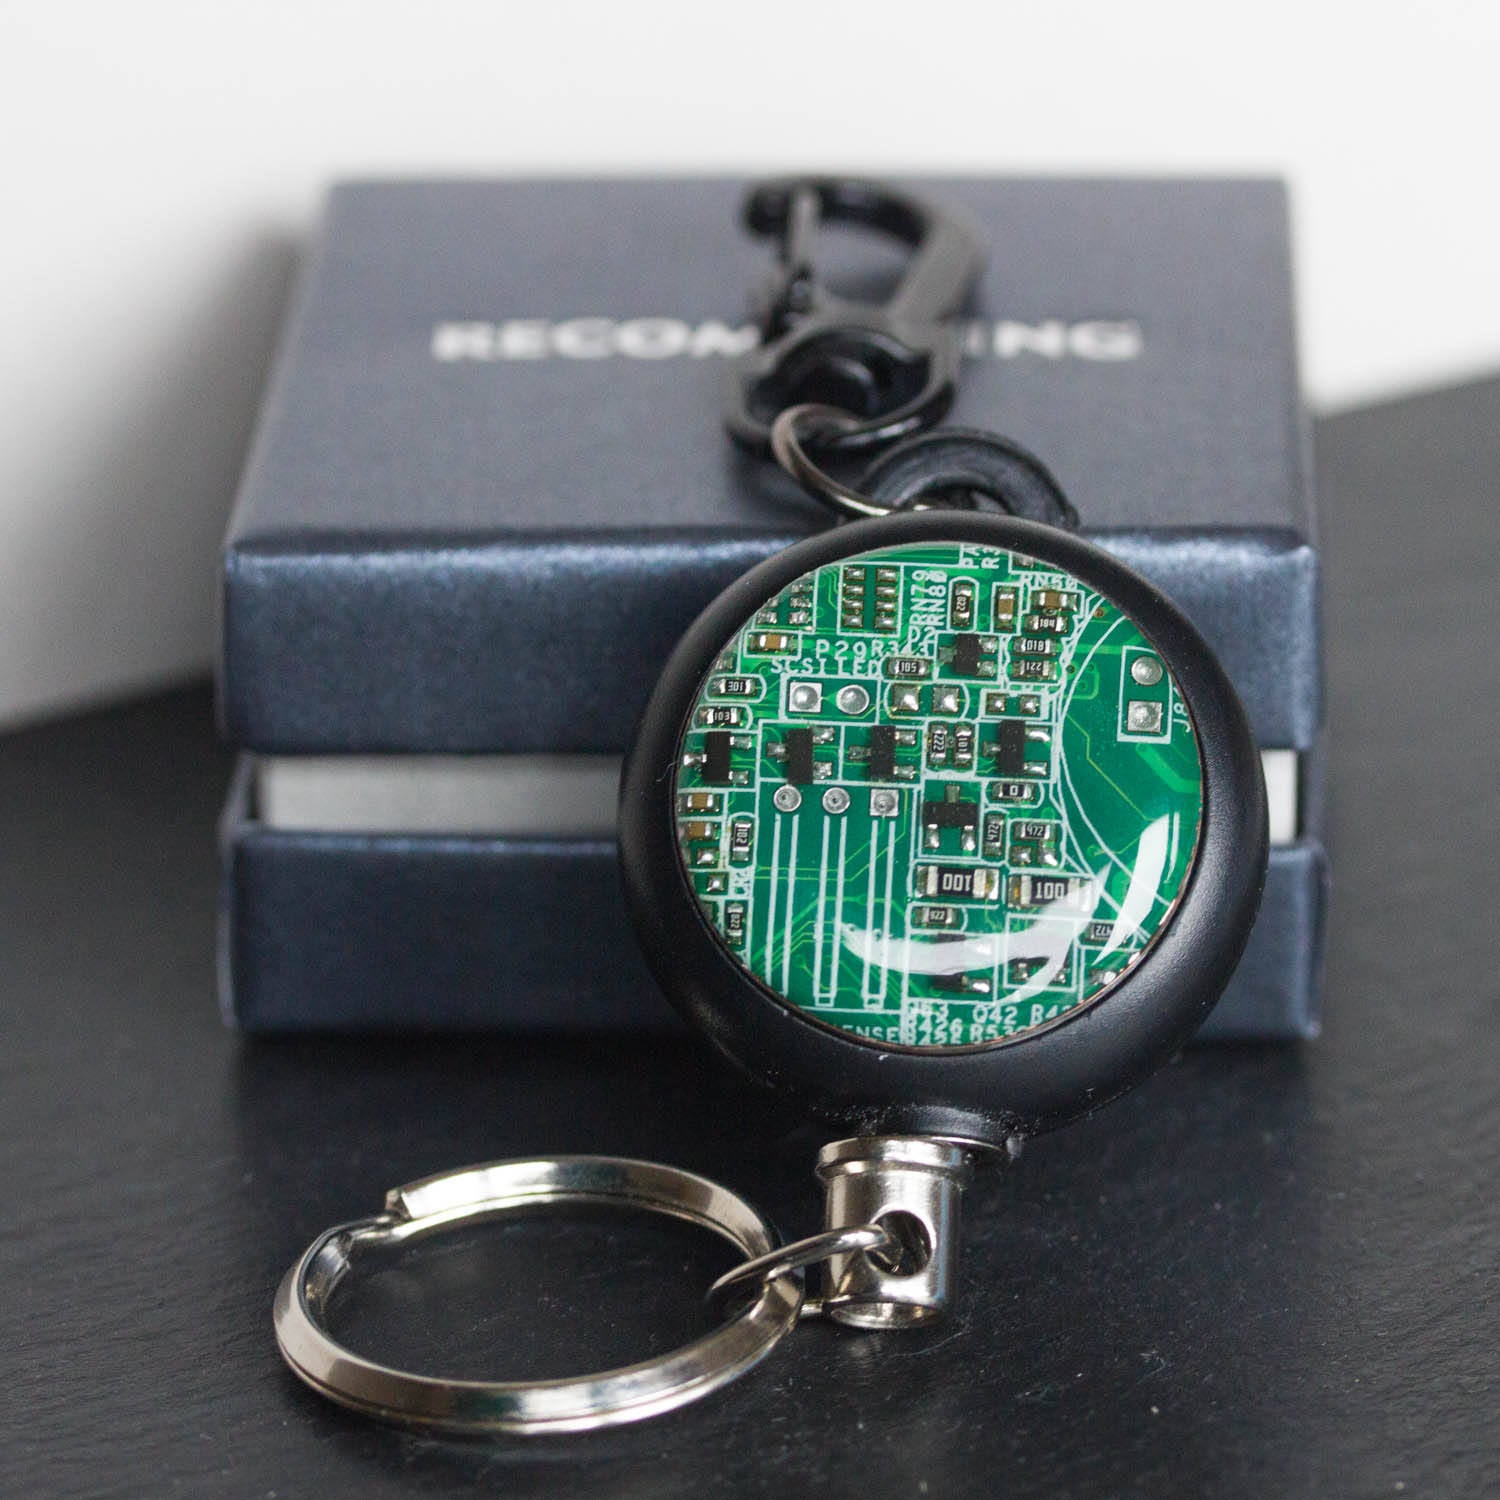 Retractable badge holder with a circuit board piece